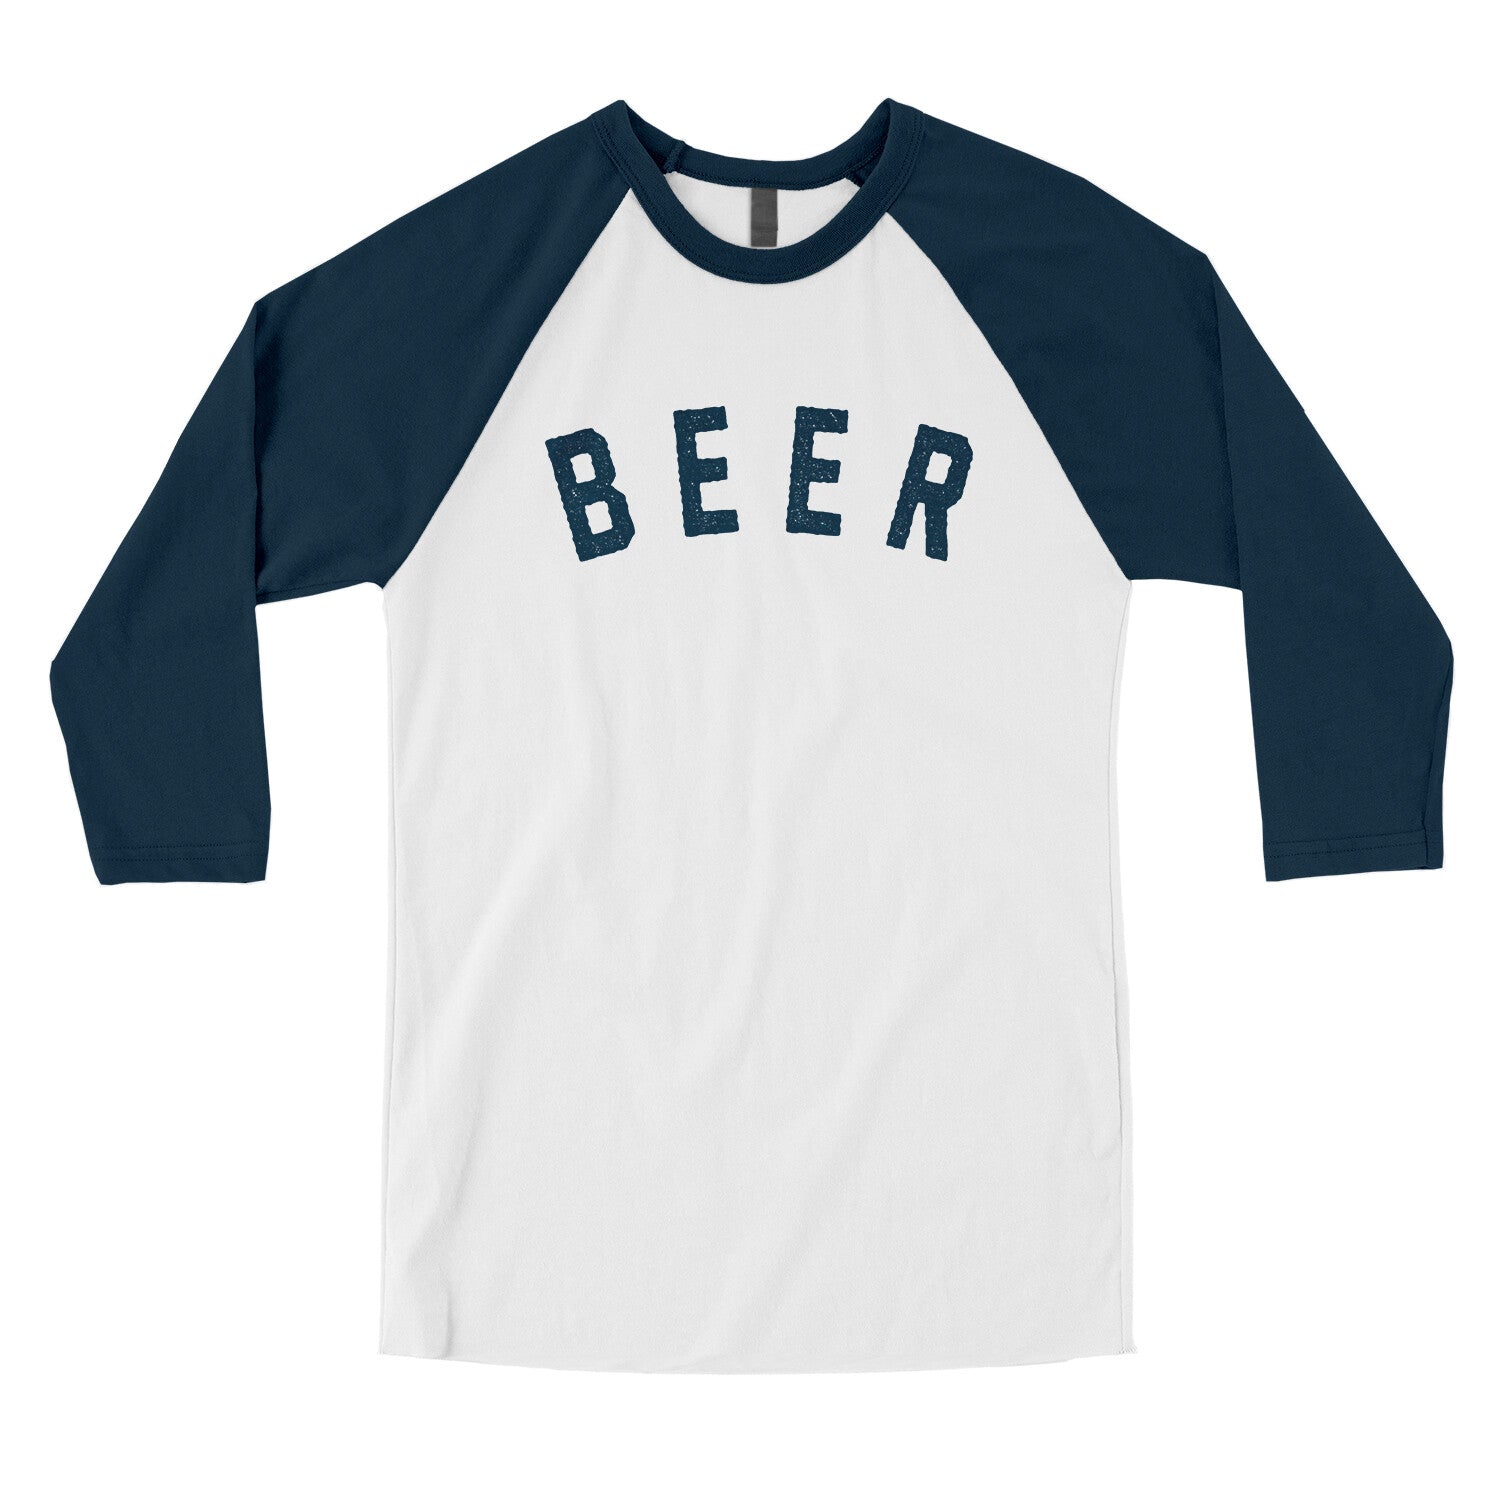 Beer in White with Navy Color